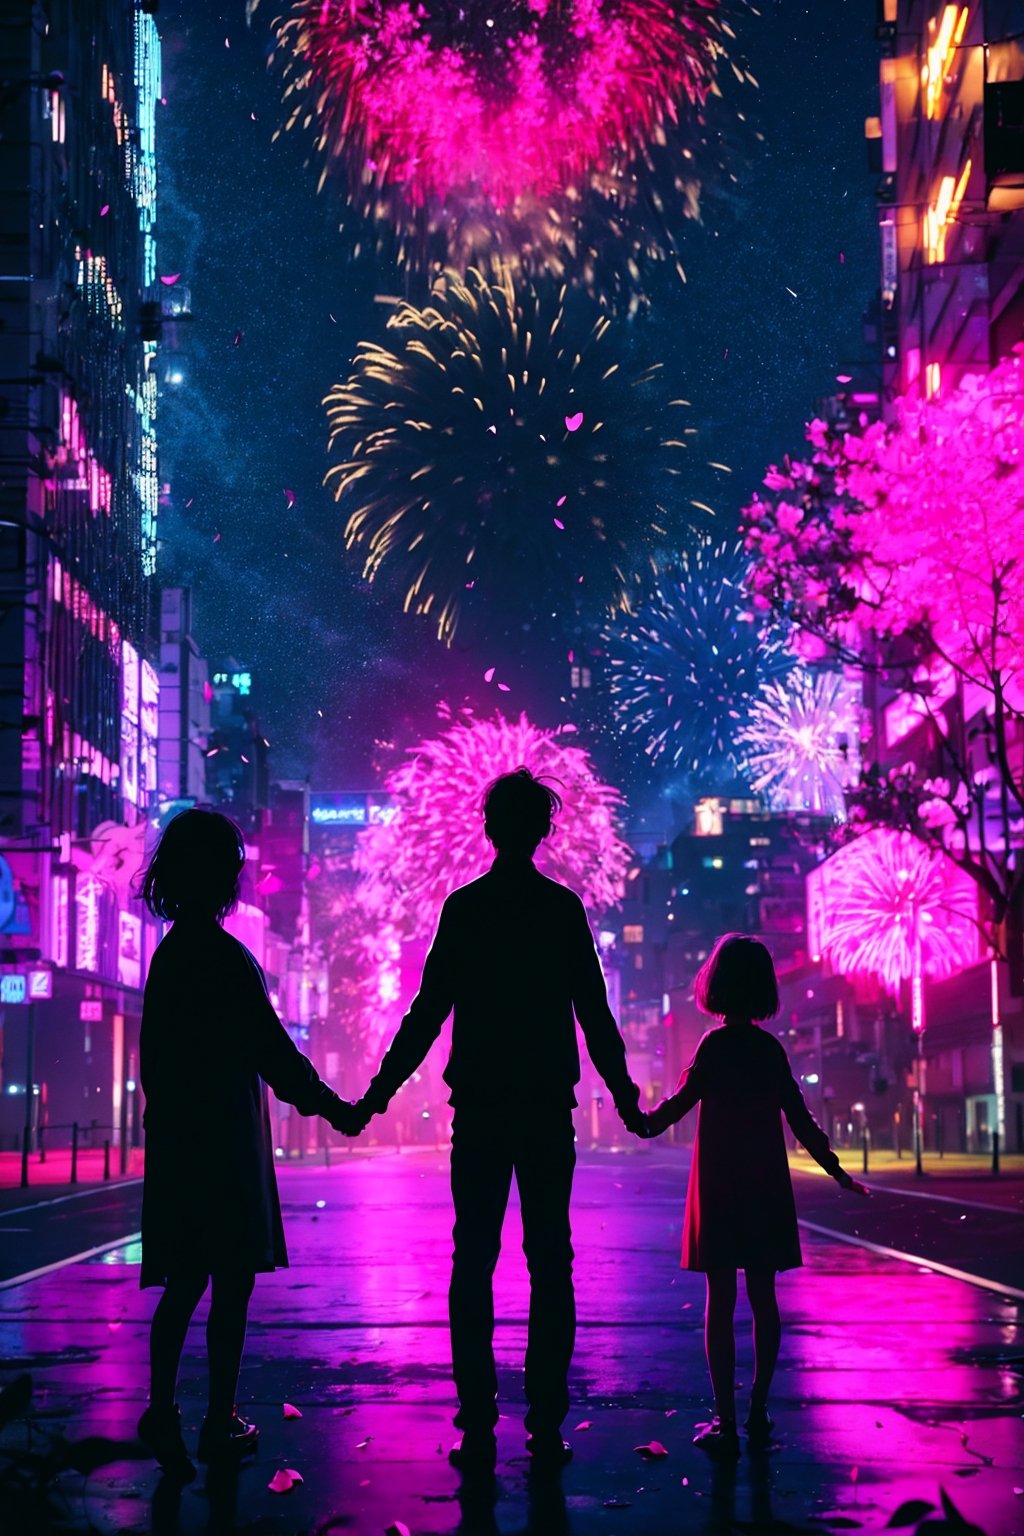 3 persons(1girl,1littleboy,1man),long girl hair, 1girl, shirt, red girl hair, 1littleboy, black boy hair, 1bigman, black man hair (holding hands ), flower, outdoors, sky, from the front, petals, night, plant, building, night sky, scenery, pink flower, city, facing away, fireworks,	 SILHOUETTE LIGHT PARTICLES,neon background